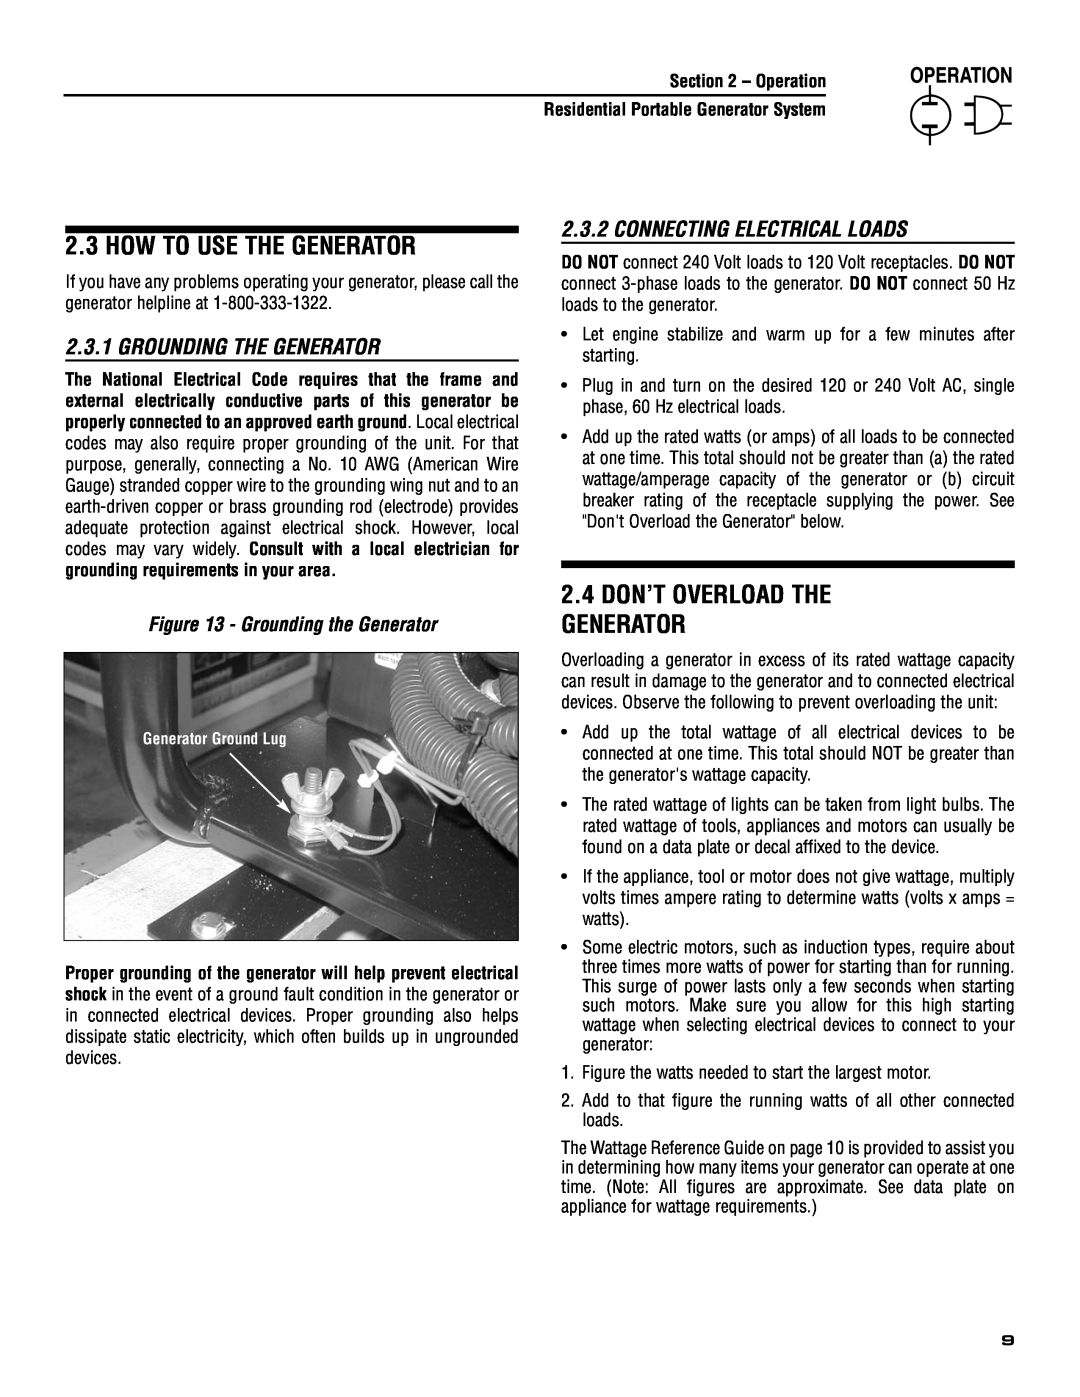 Generac 005308-0 owner manual How To Use The Generator, 2.4 DON’T OVERLOAD THE GENERATOR, Grounding The Generator 